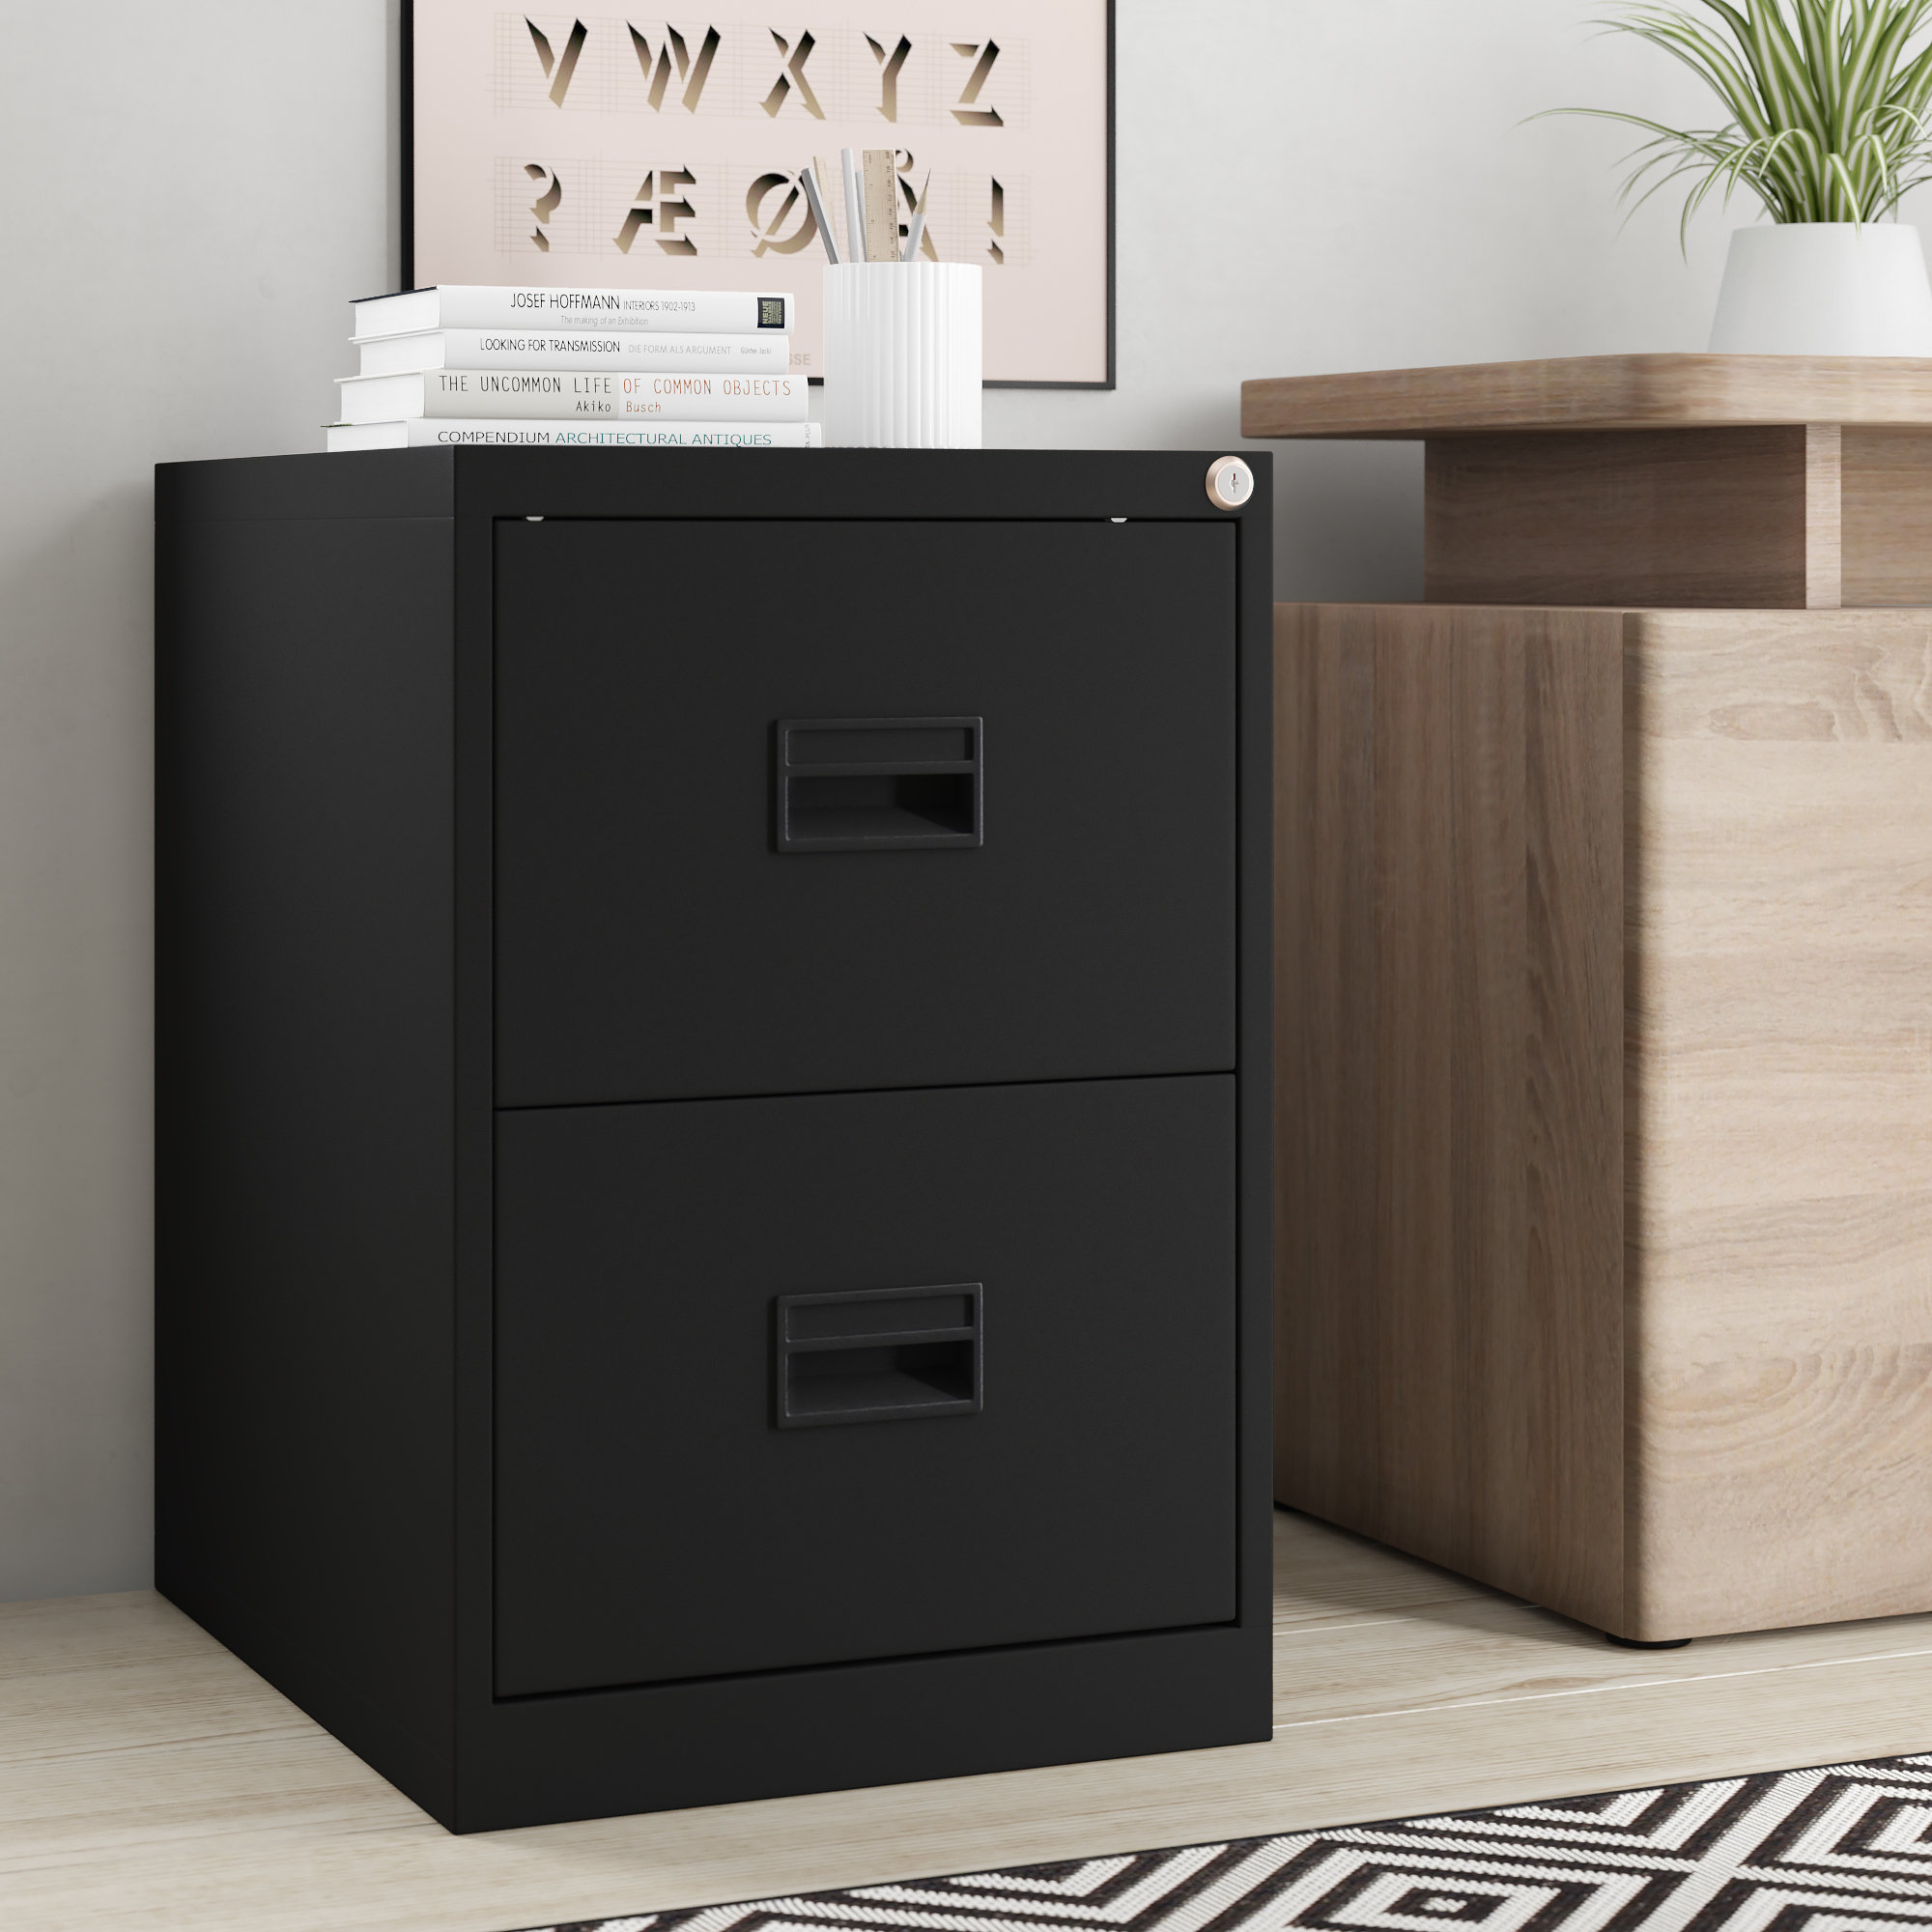 Symple Stuff Office 2 Drawer Filing Cabinet Reviews Wayfaircouk within proportions 2000 X 2000